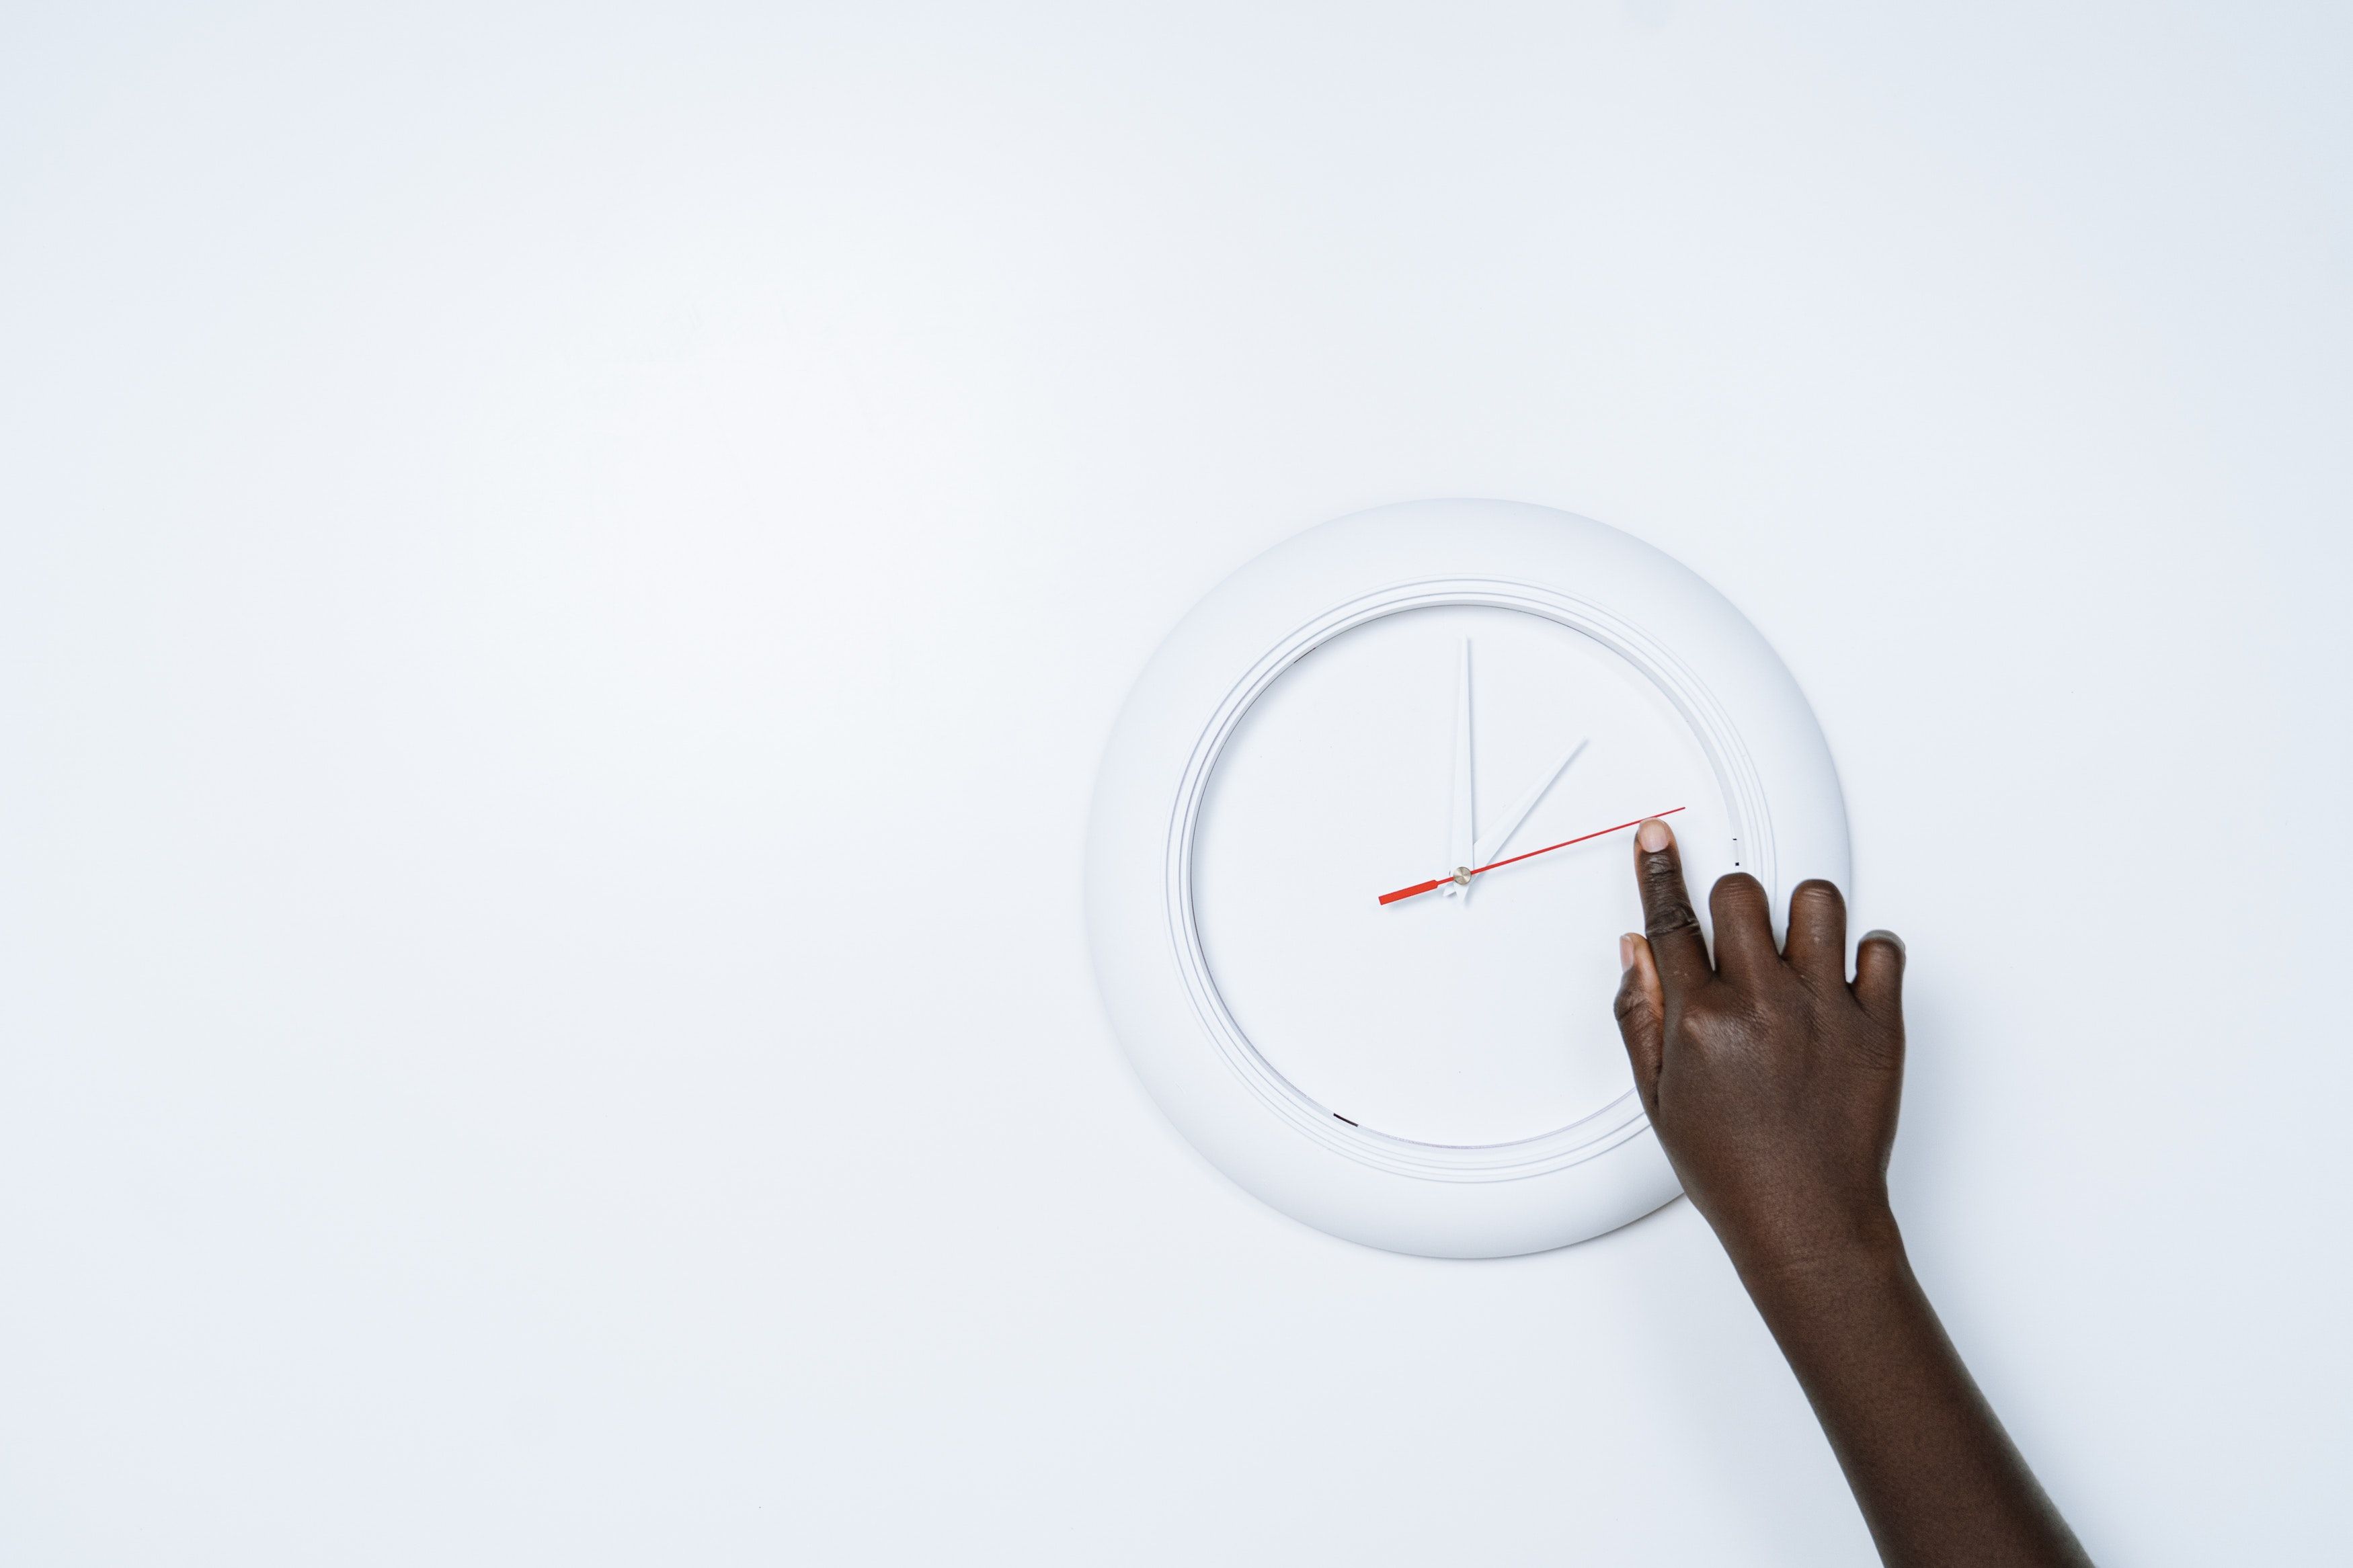 Hand reaches up to touch white clock face, mounted on a white wall